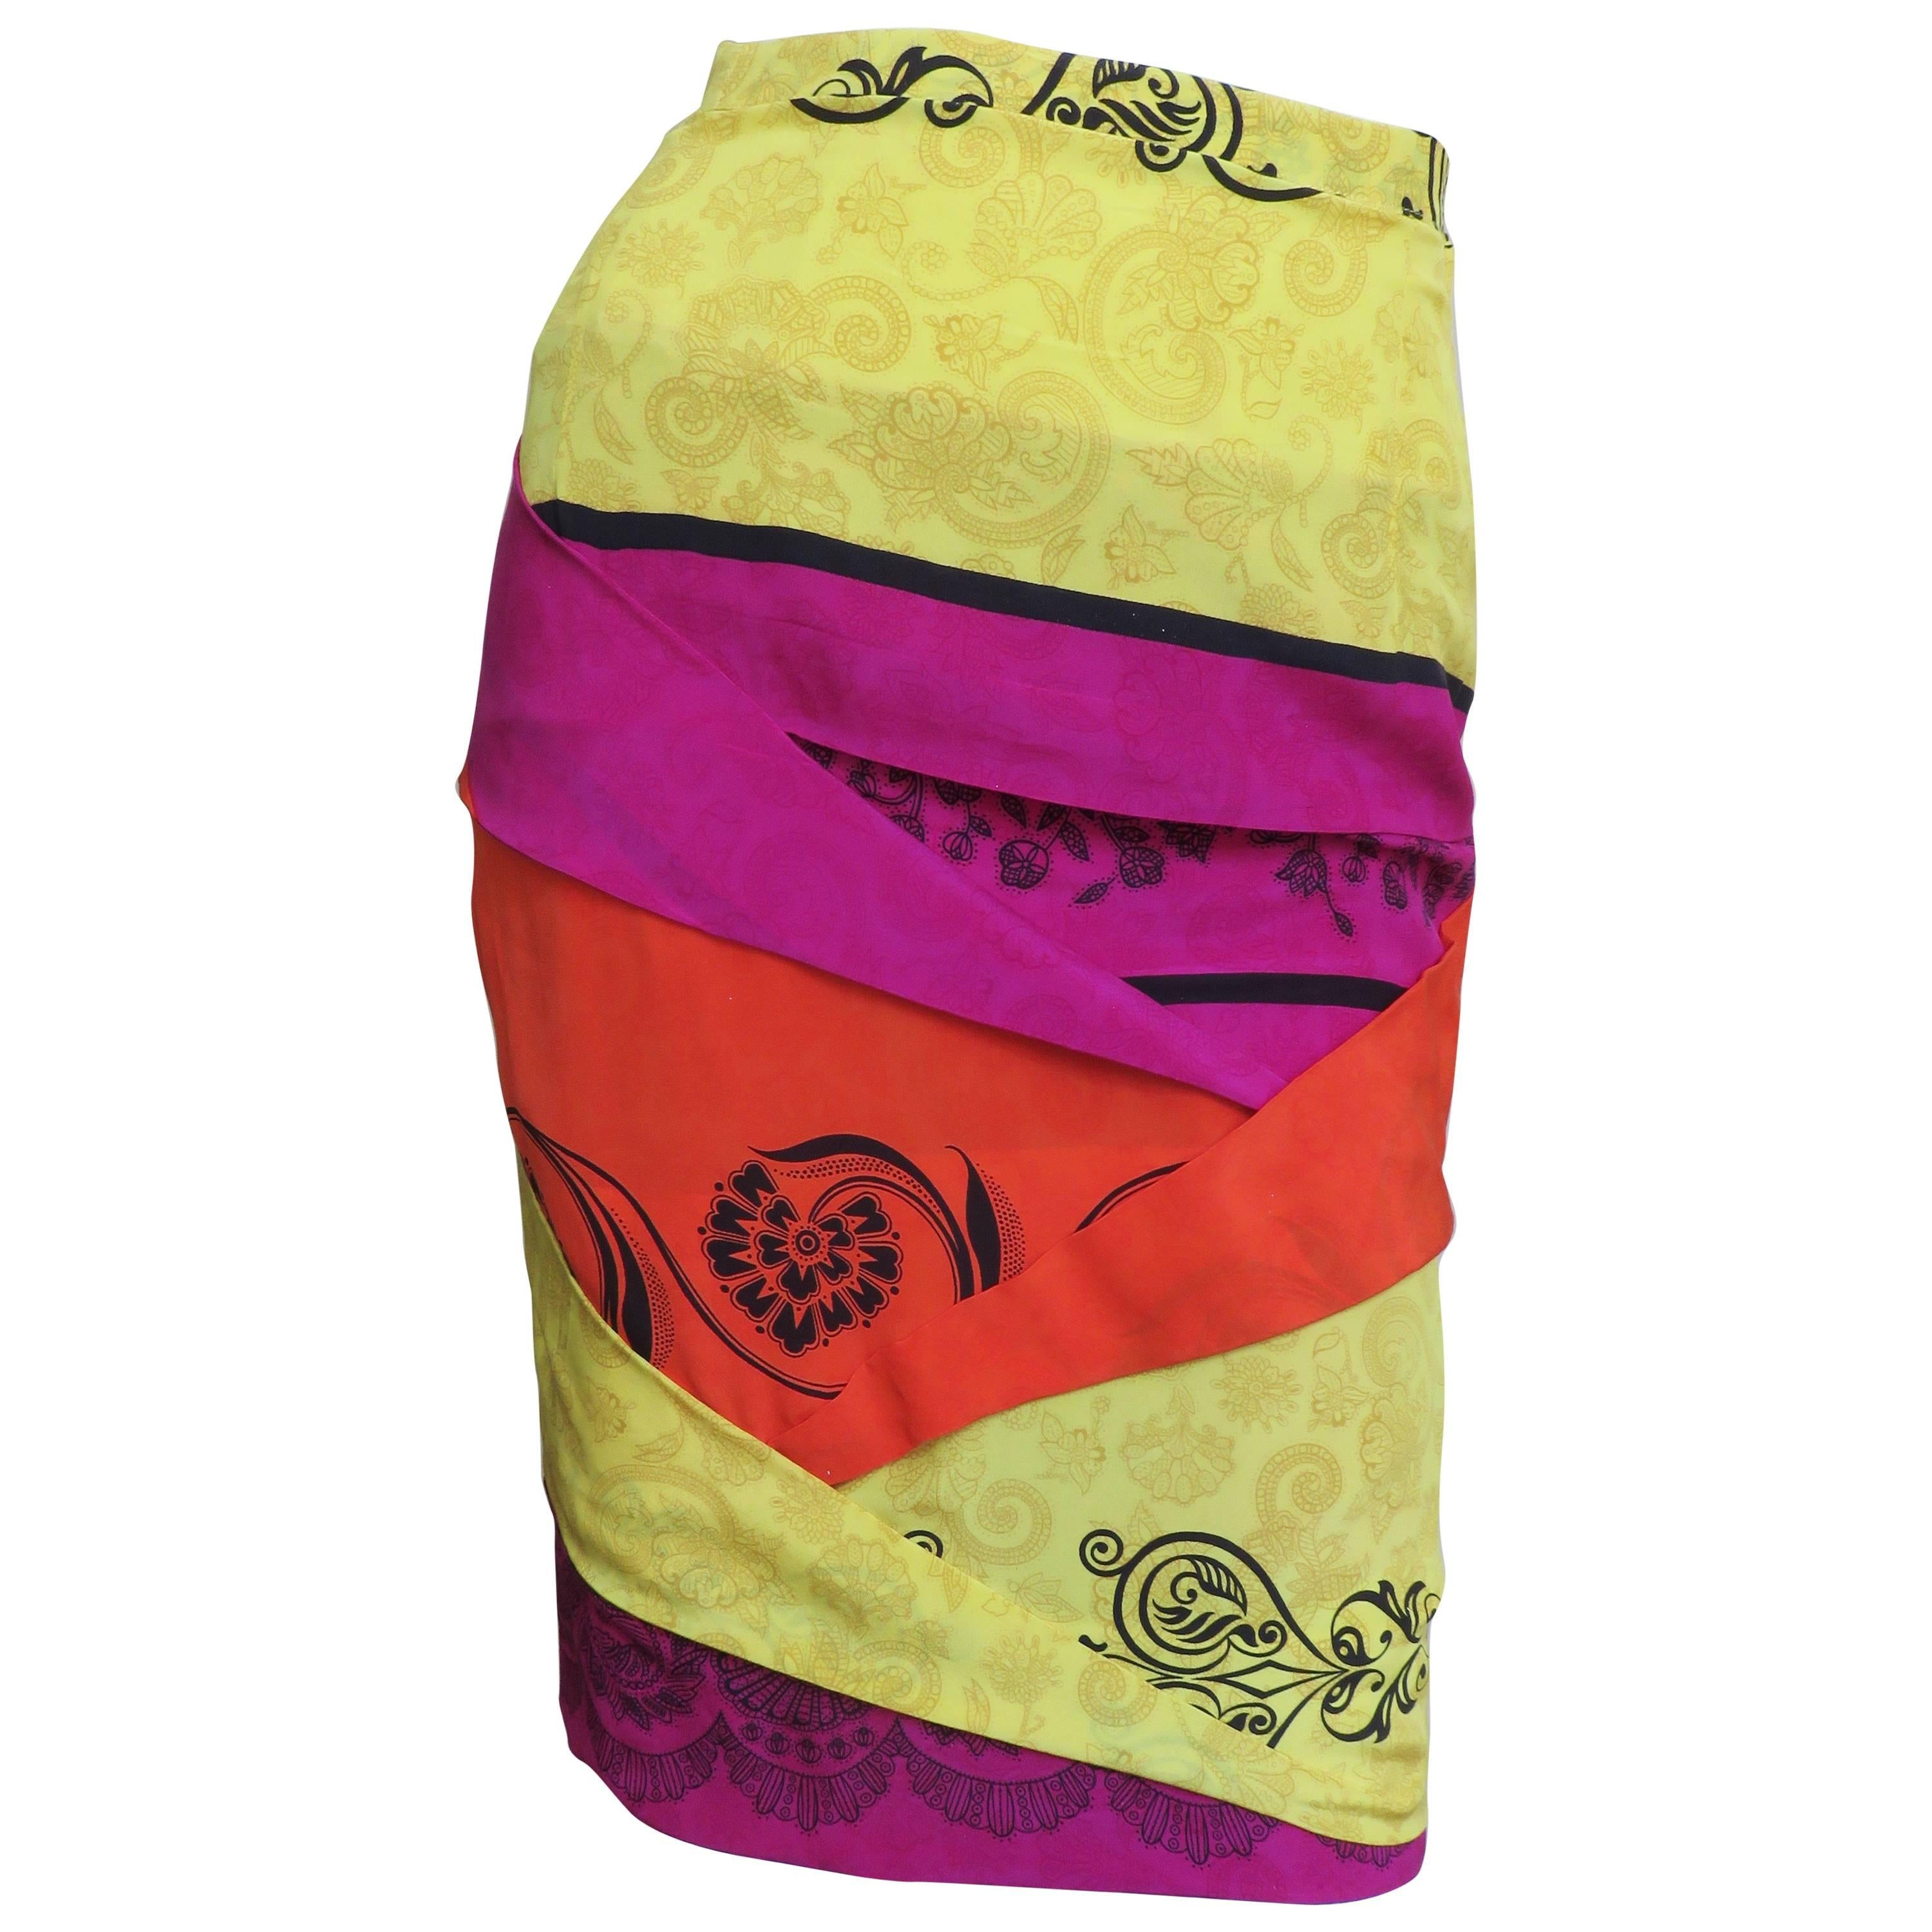 1990s Gianni Versace Origami Color Block Skirt